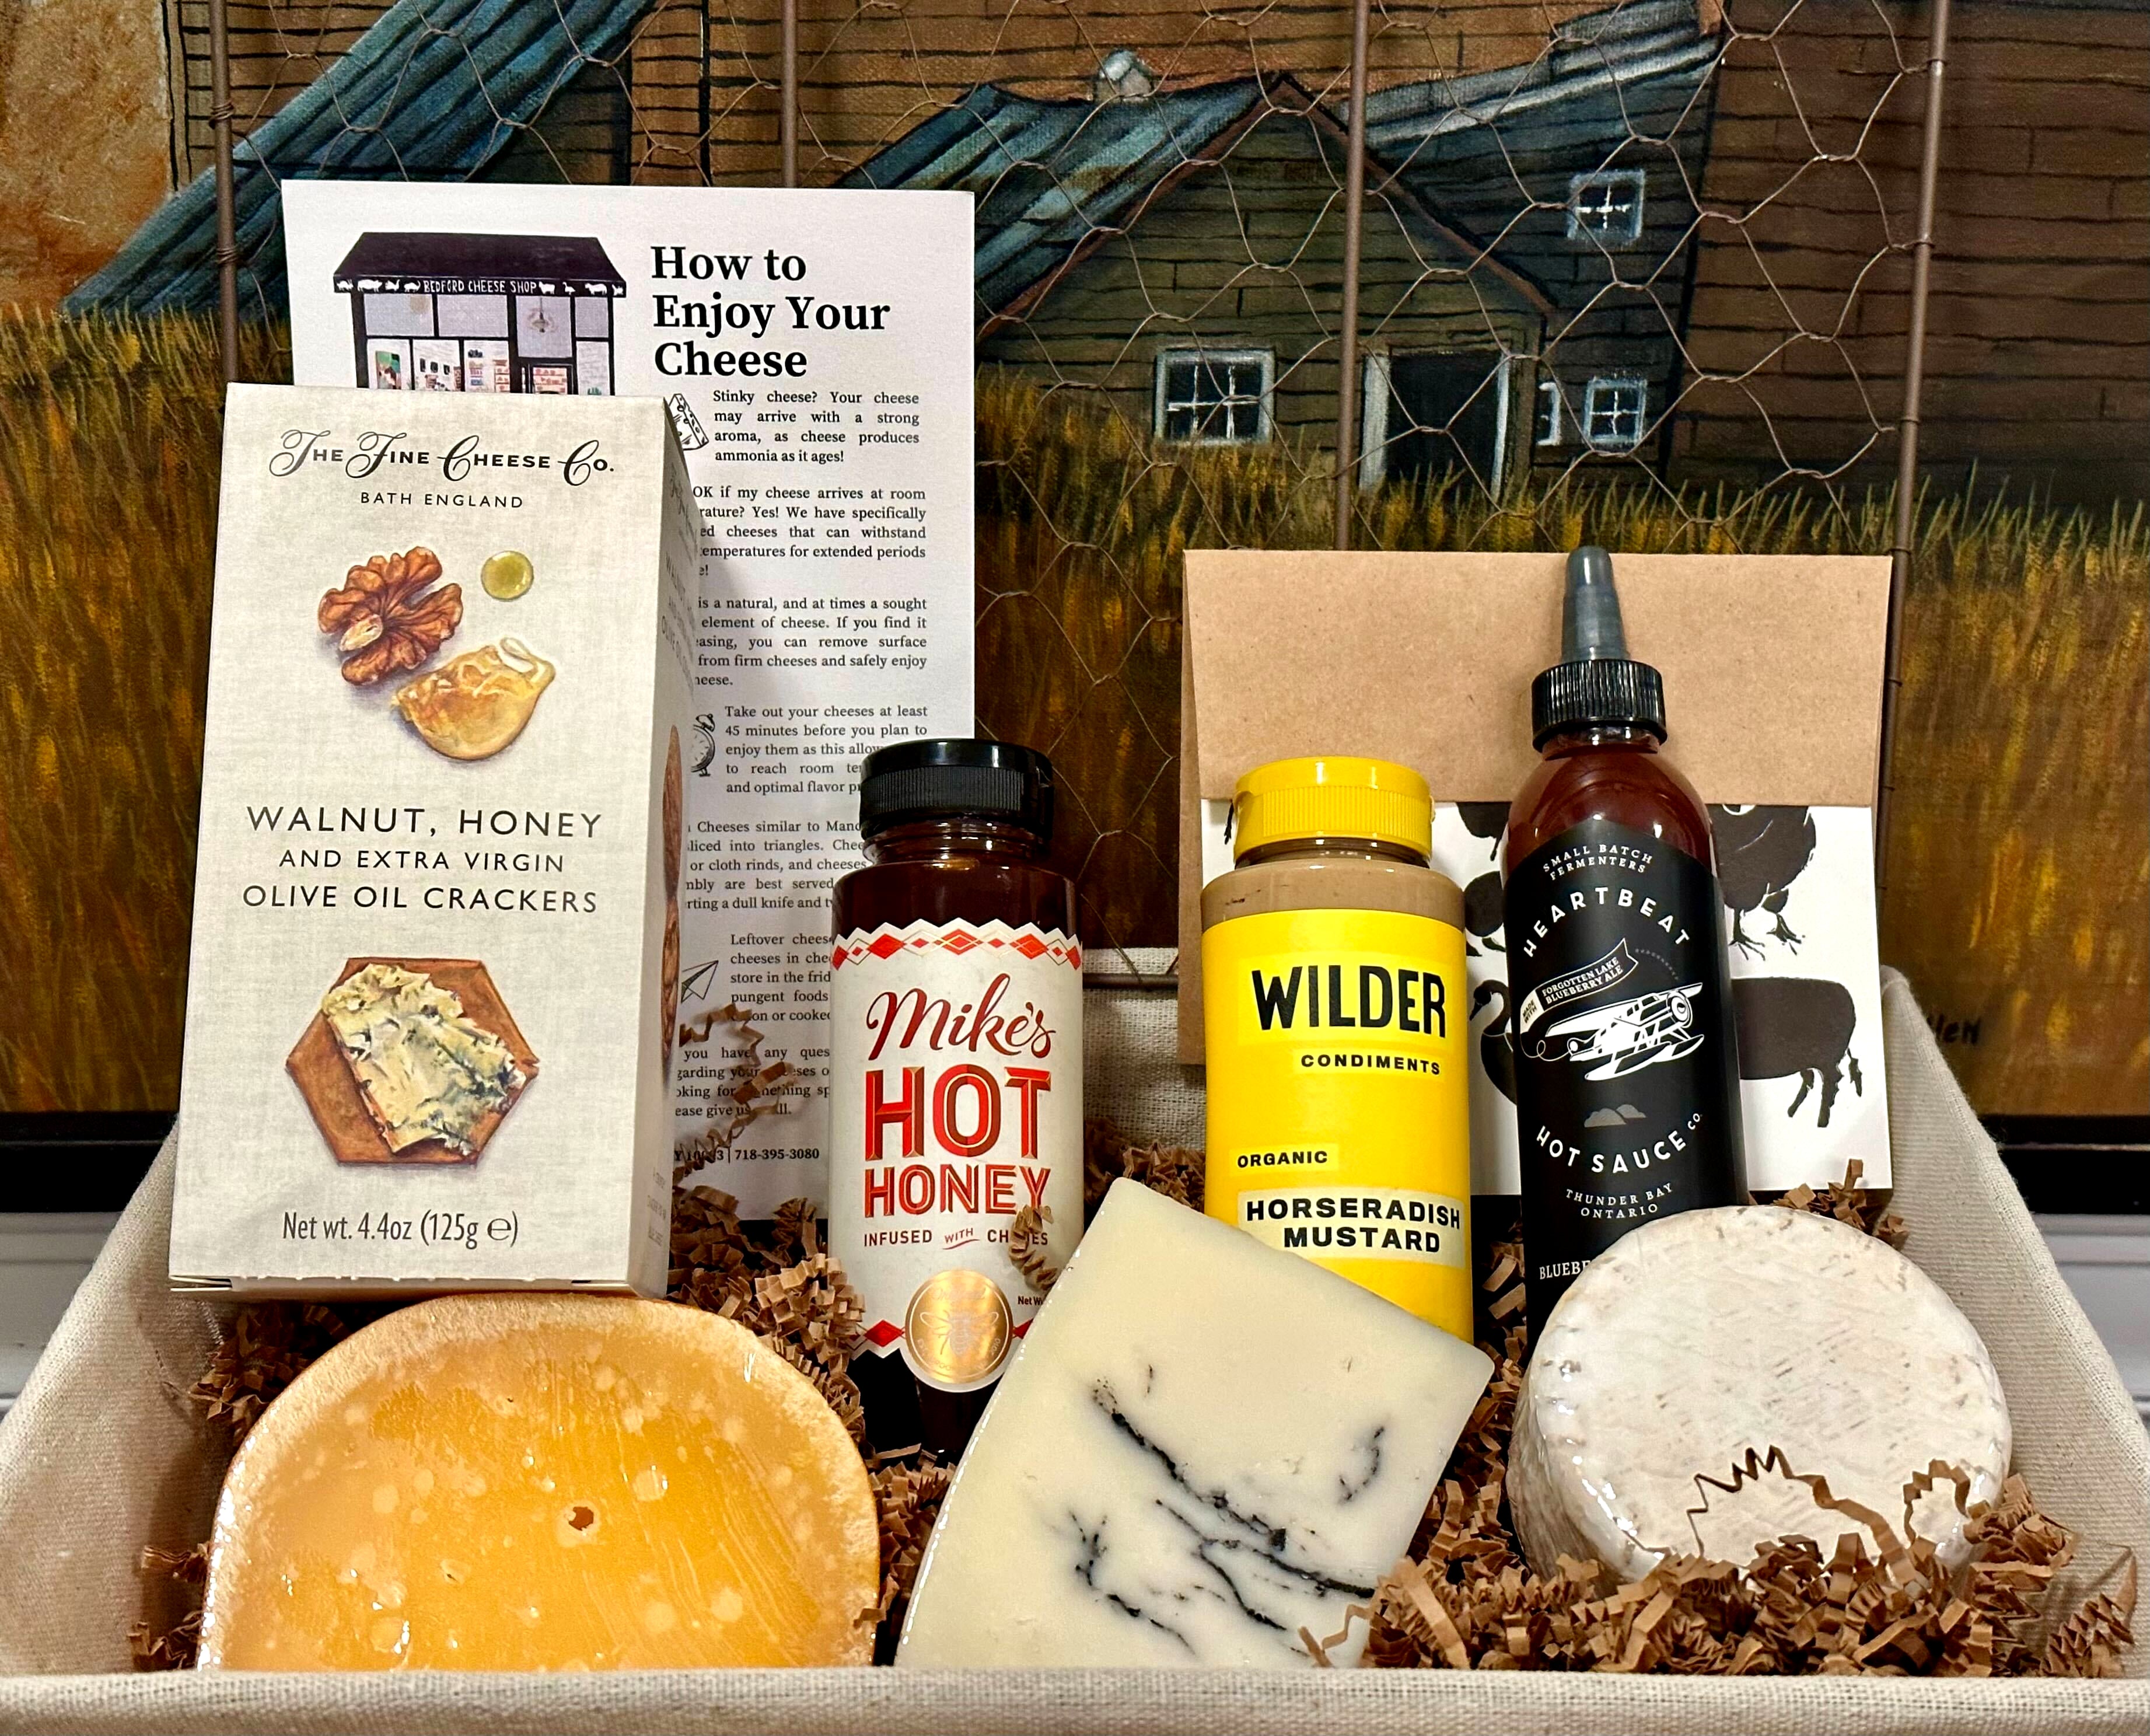 Image of the Washington Square Park gift basket contents inside a wire basket. Includes: hot honey, mustard, hot sauce, crackers, assorted cheeses, and a card.